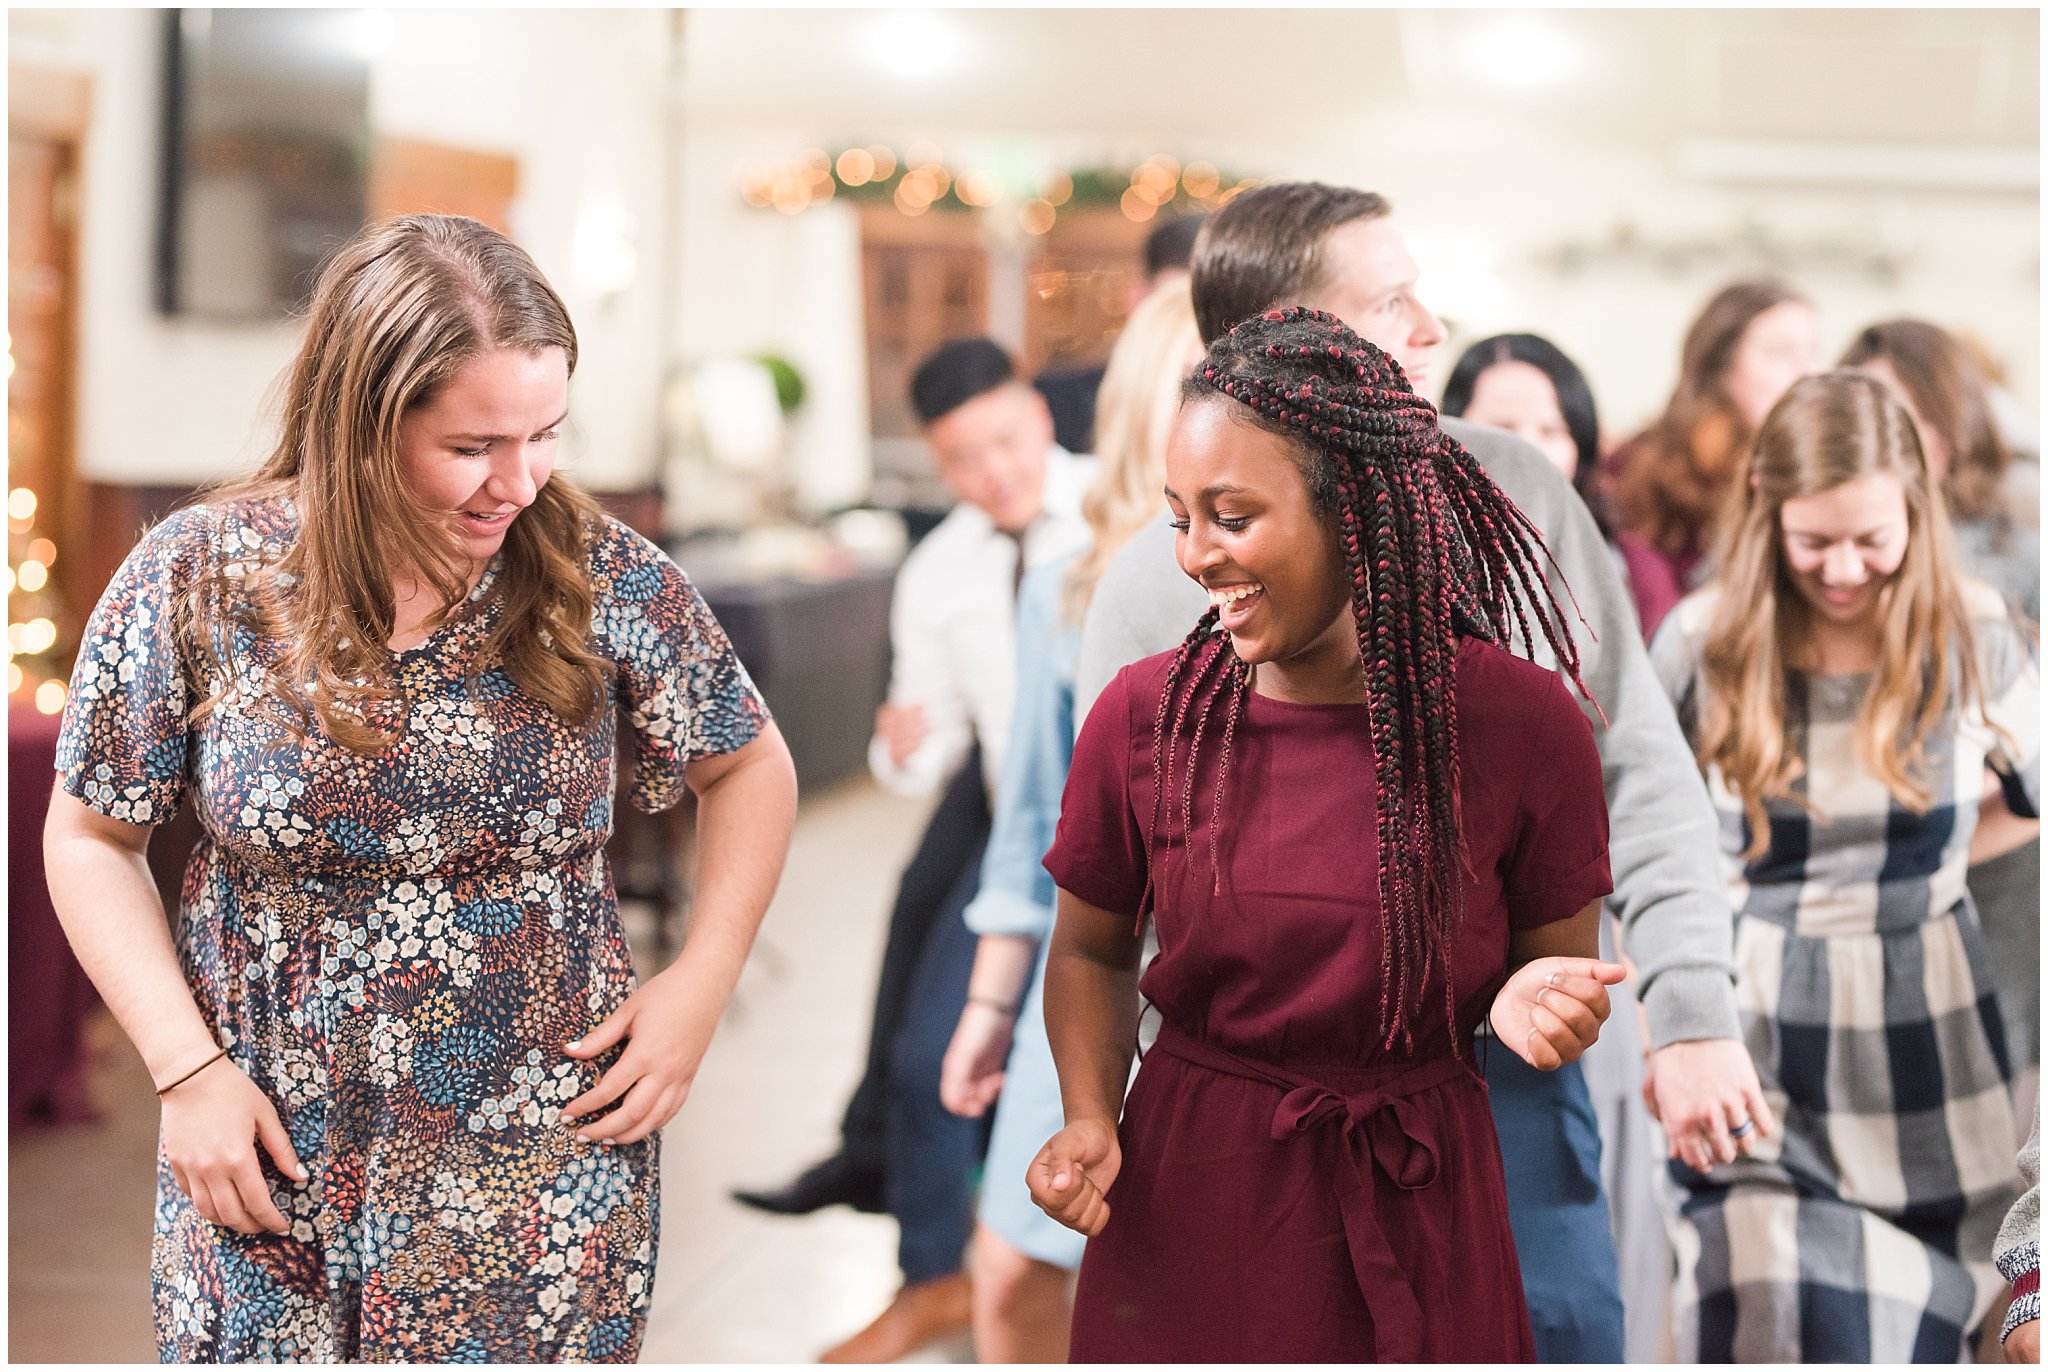 Party dancing at the Gathering Place at Gardner Village | Gardner Village Wedding | The Gathering Place | Jessie and Dallin Photography